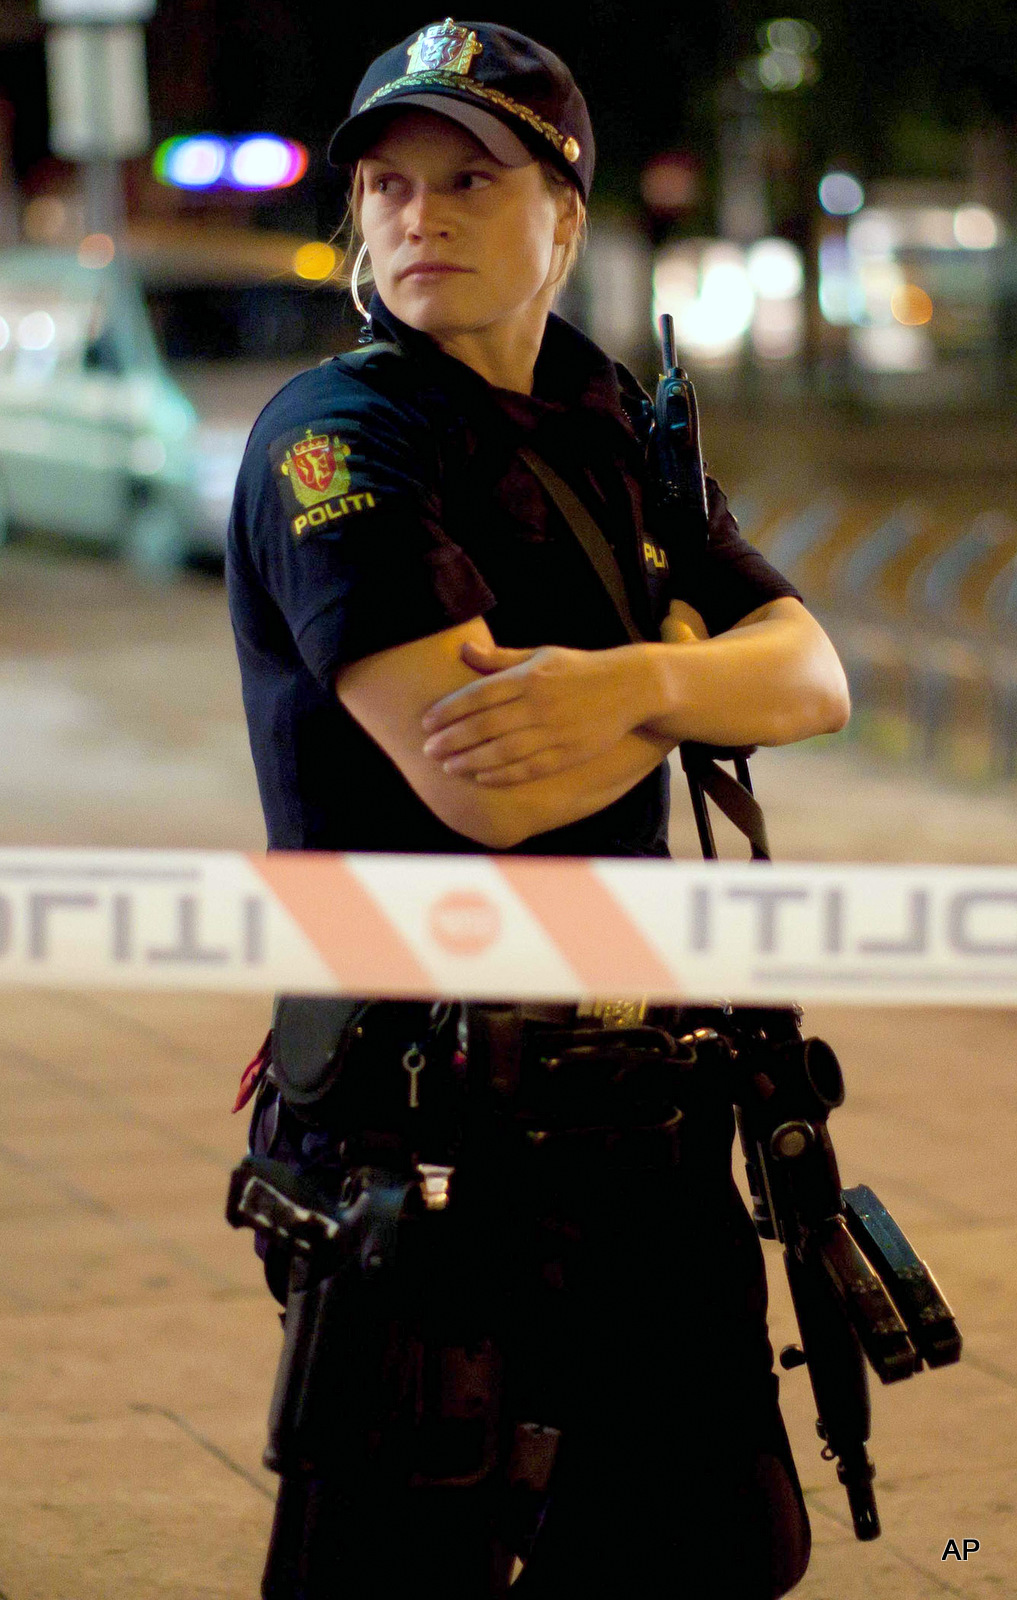 Despite having access to firearms, Norwegian police rarely employ lethal force, with the last killing of a civilian by police in 2006.